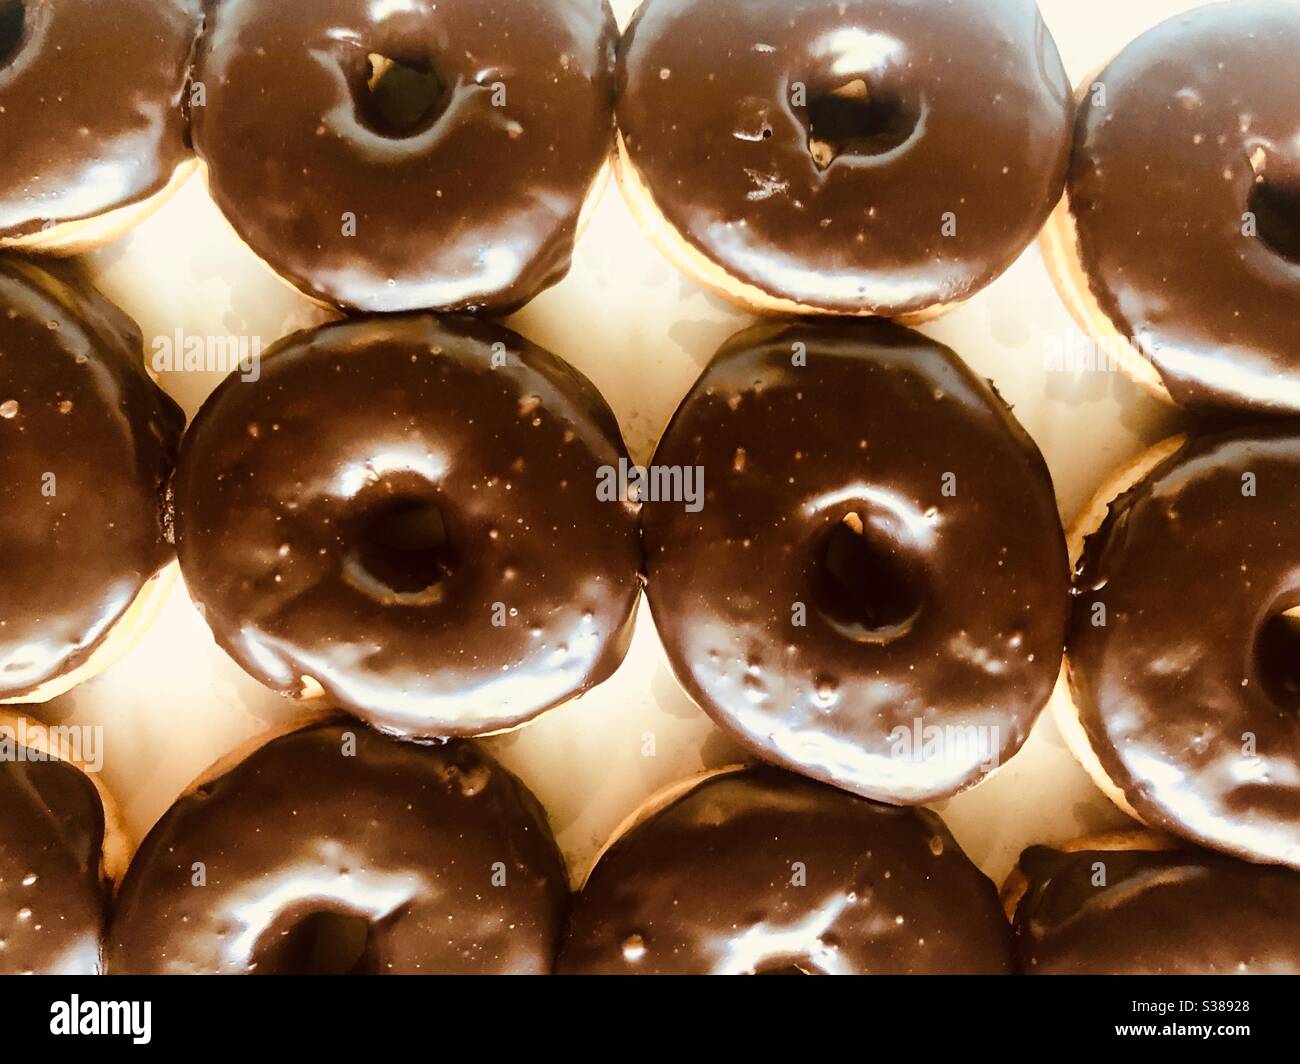 Top view of a full frame of chocolate covered donuts in a white box Stock Photo